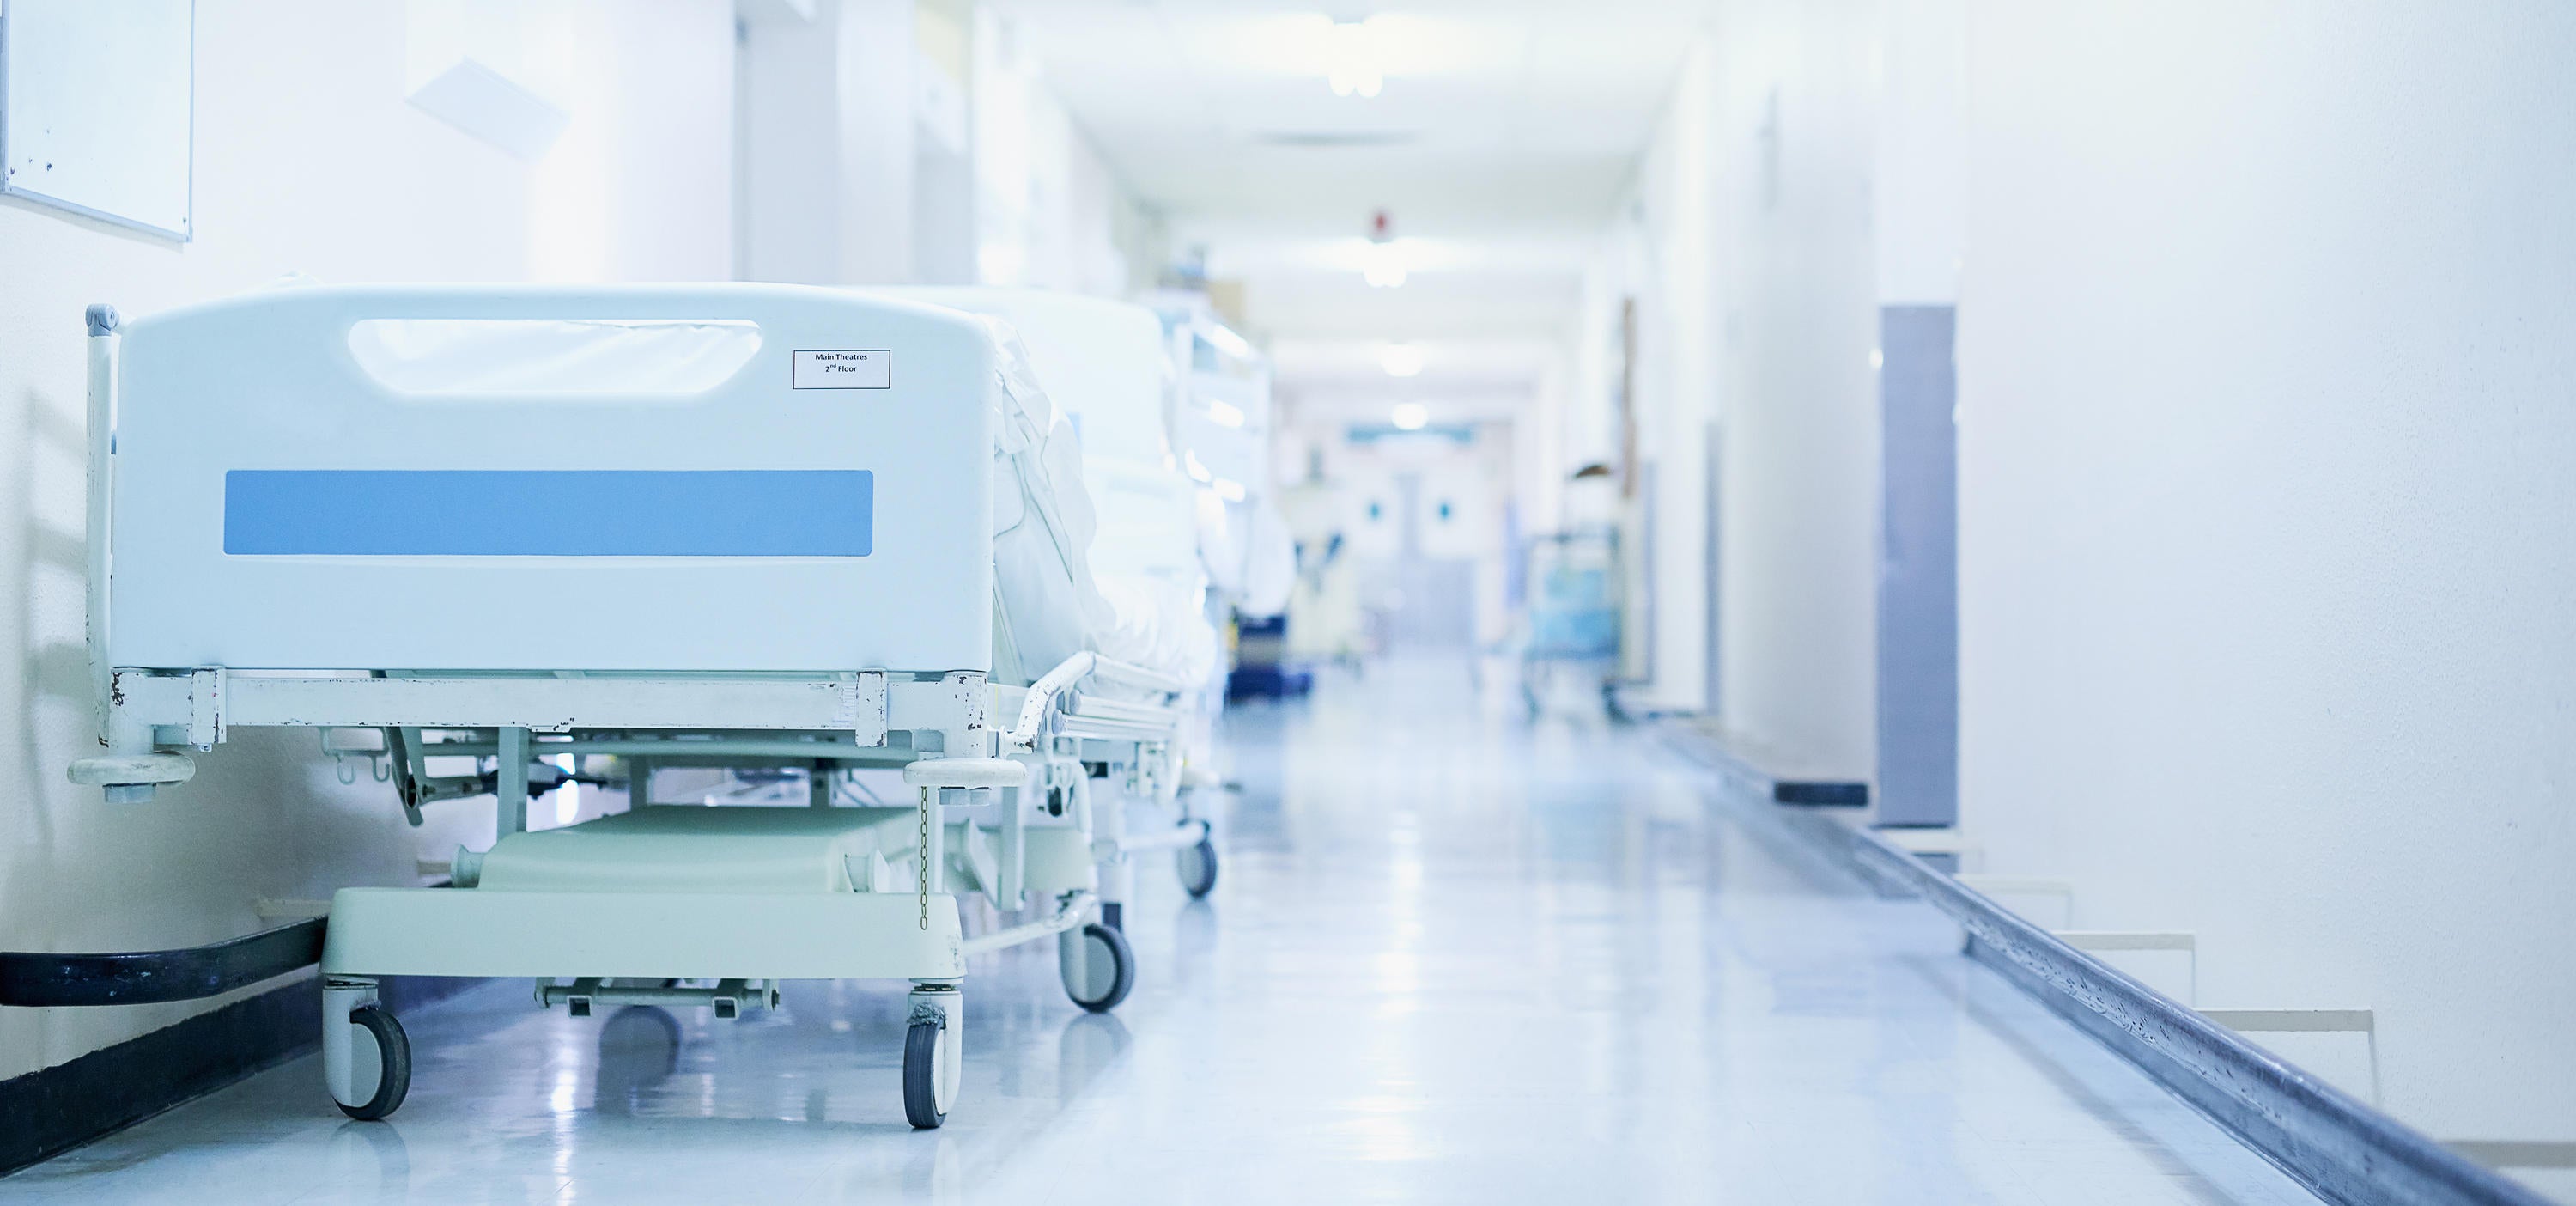 Stock photo of a hospital hallway with an empty bed on the left side.